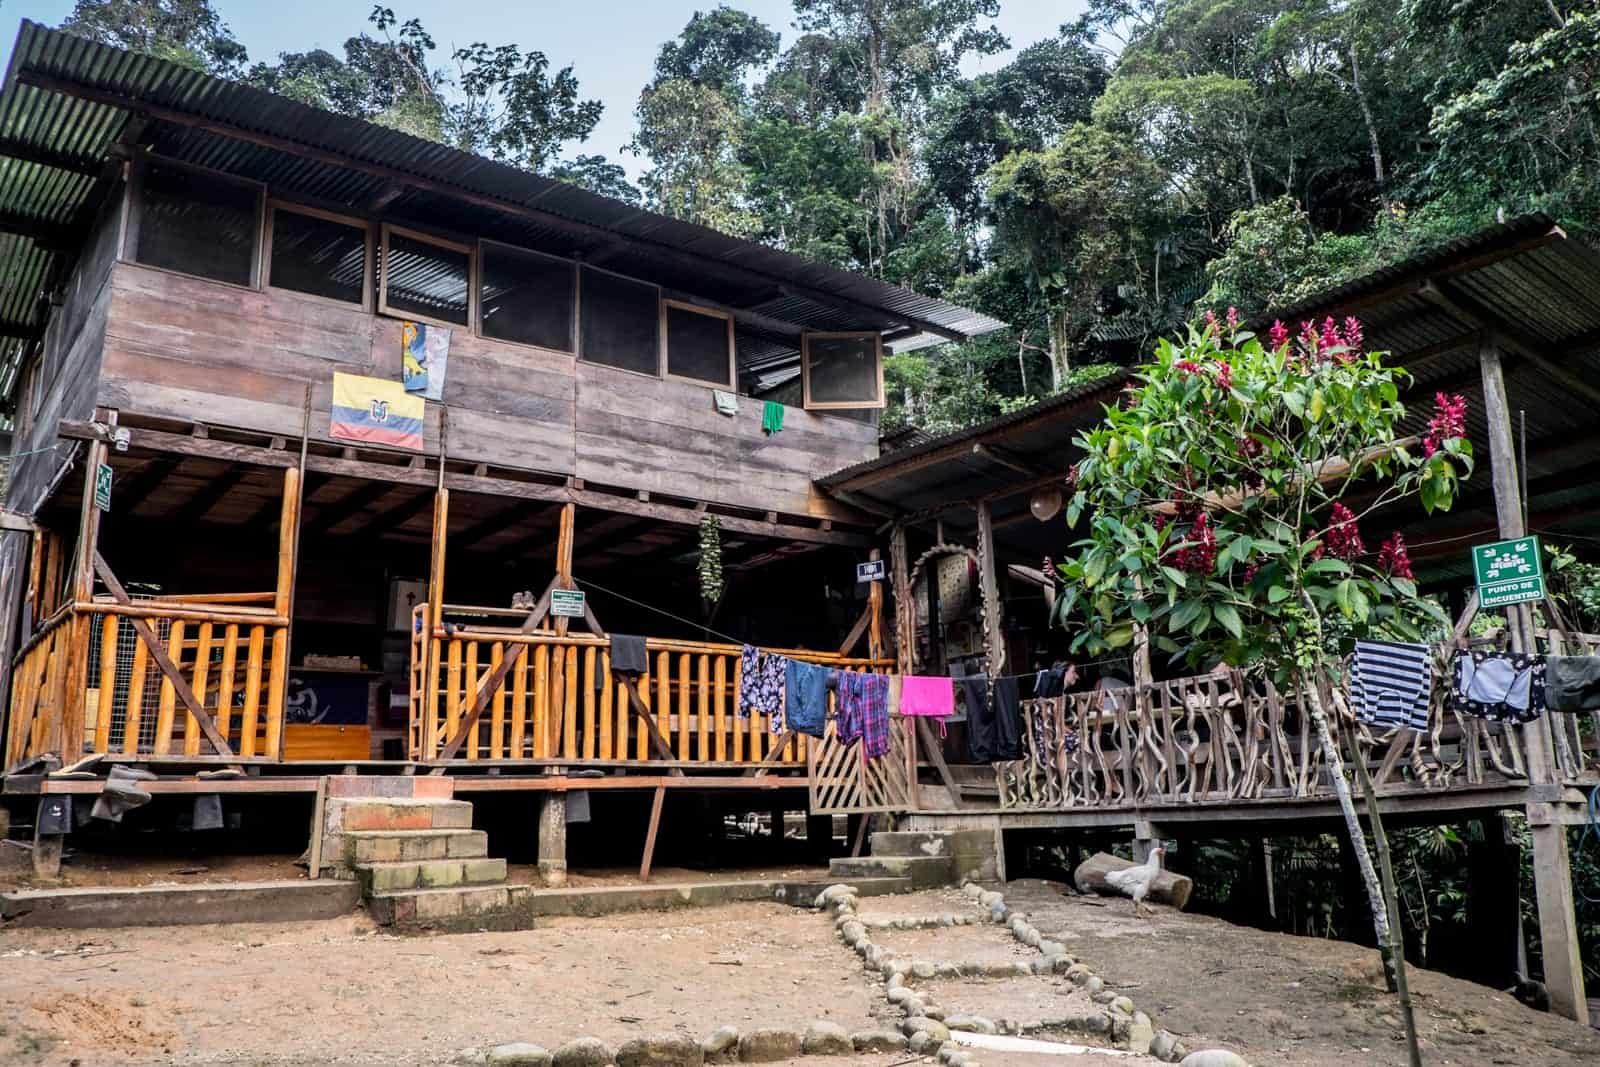 A two story wooden house and a single story wooden hut - a local house in the Ecuador Amazon Rainforest.